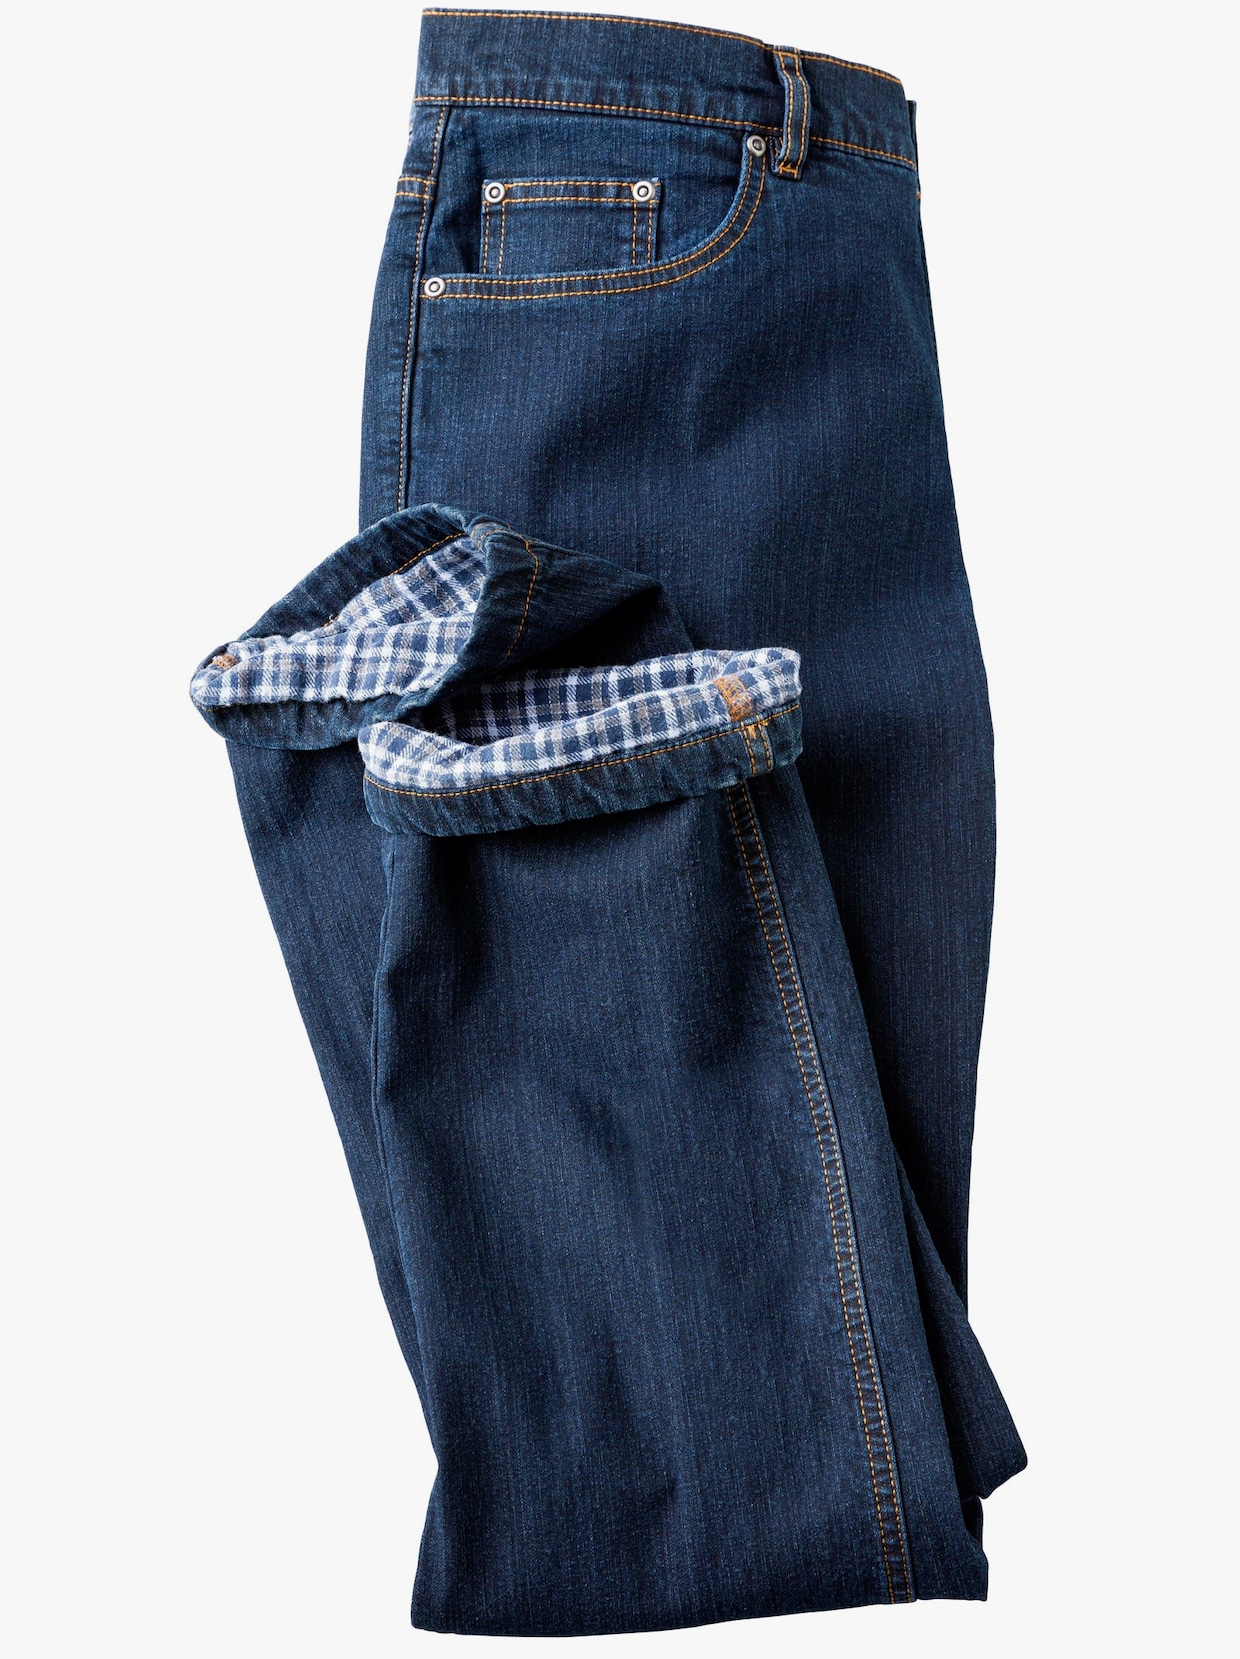 Thermo-Jeans - blue-stone-washed